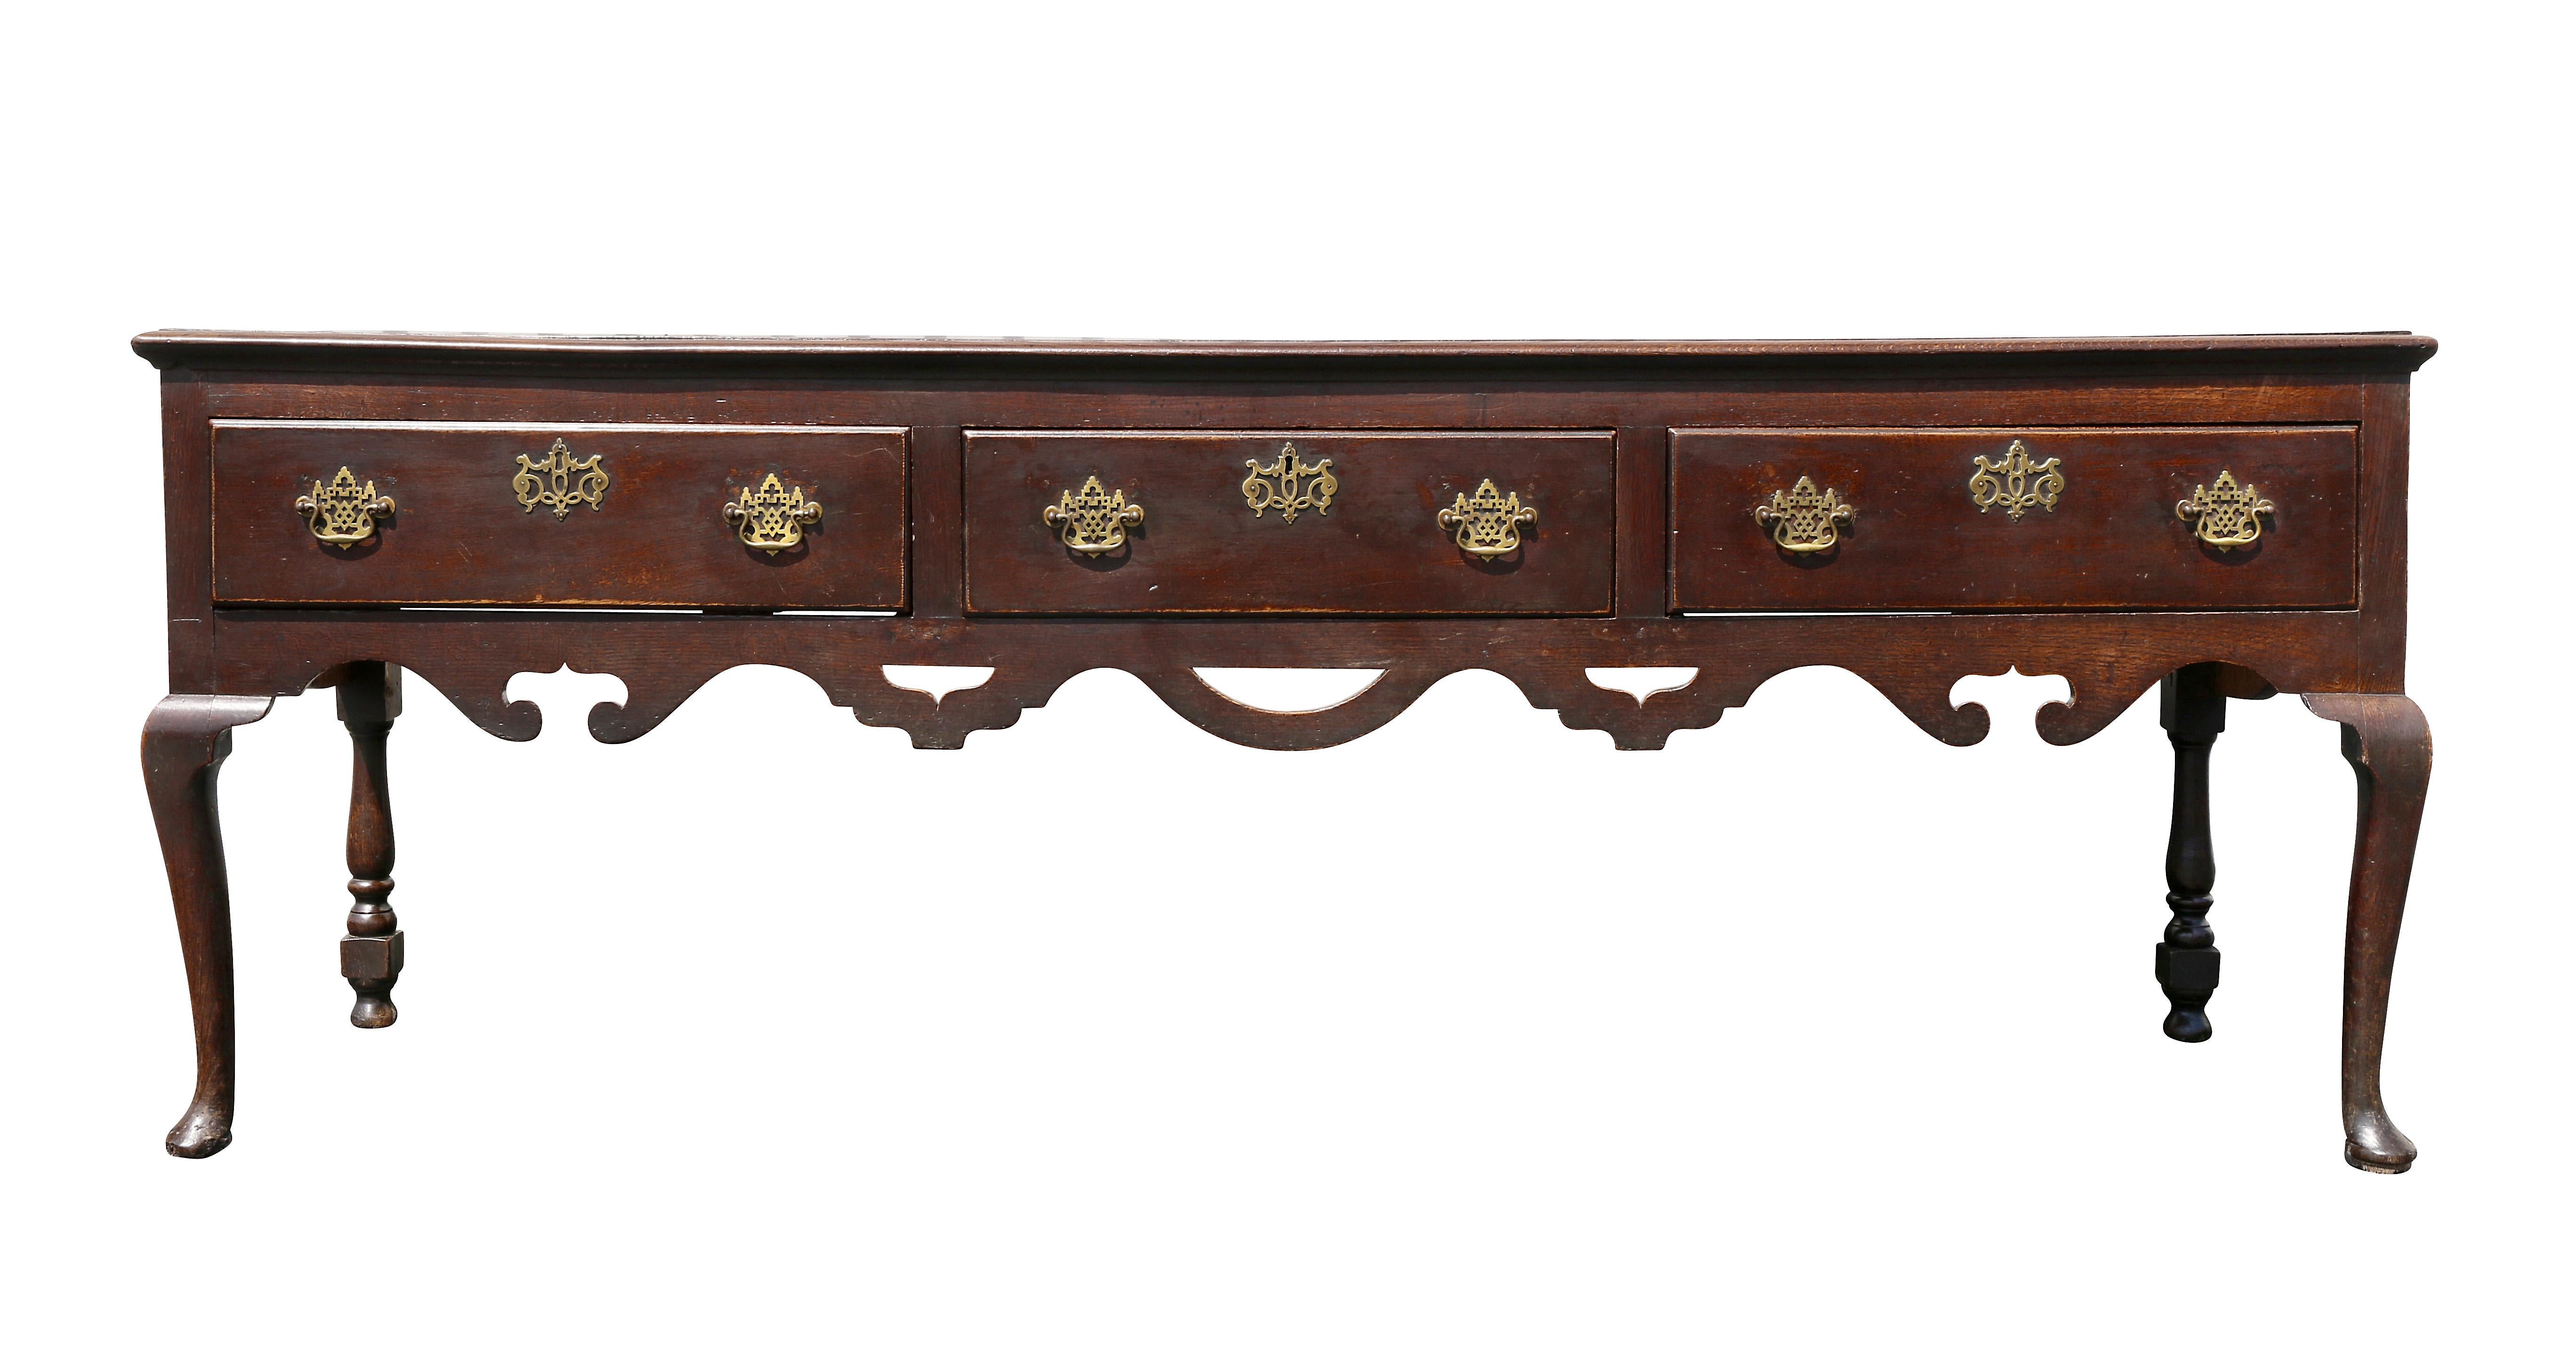 Rectangular top over three drawers and a carved open work apron, raised on cabriole legs. Rear legs are turned. Brass handles.